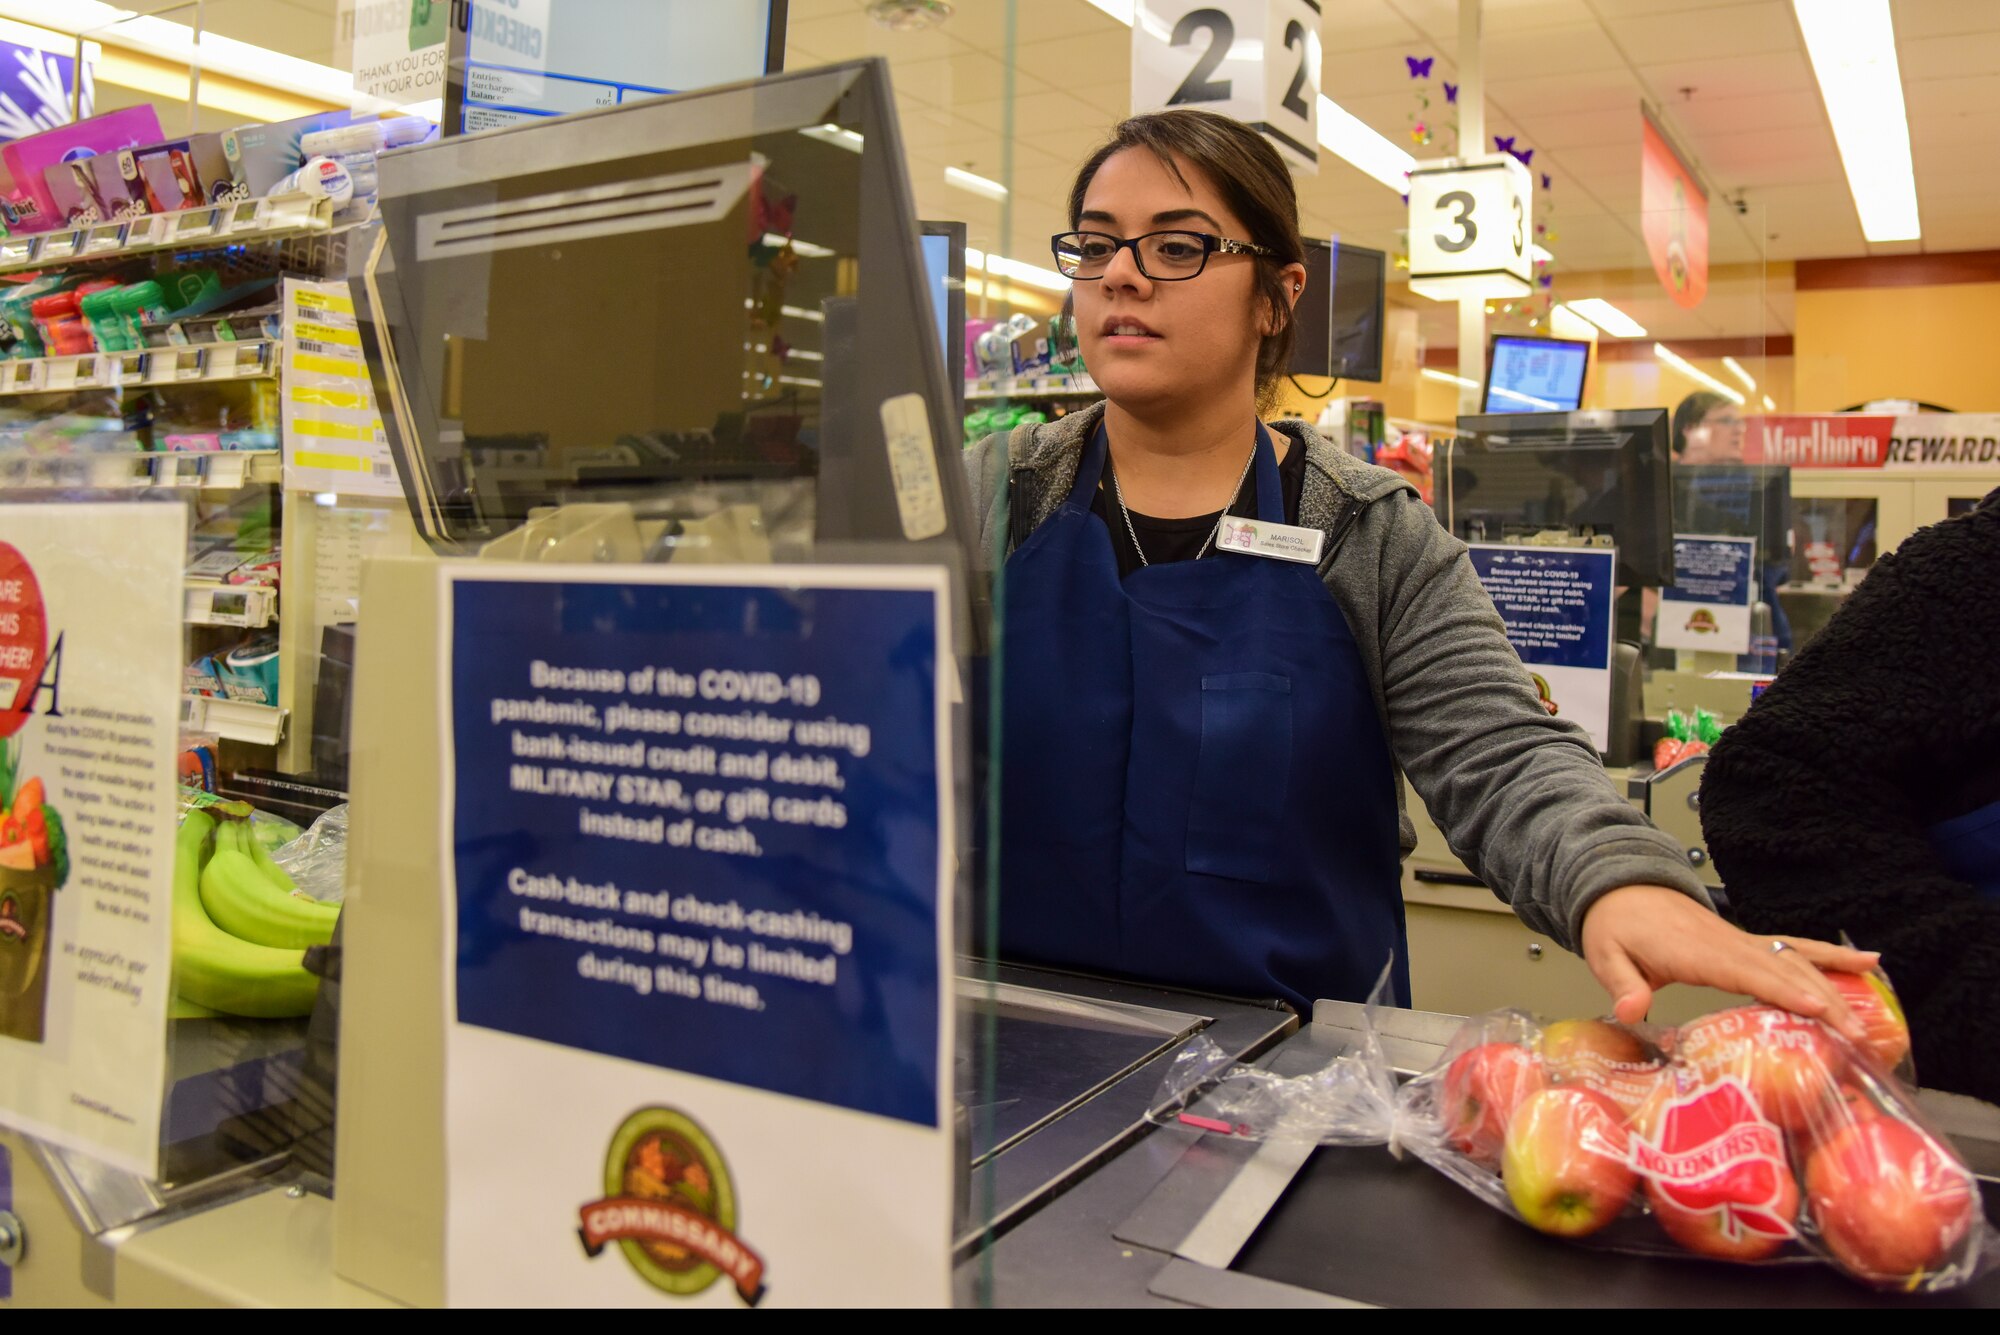 Marisol Cantu, Defense Commissary Agency sales store checker, scans groceries behind a plastic shield to protect the cashiers from germs, March 31, 2020 at Laughlin Air Force Base, Texas. Commissary workers at Laughlin are considered essential personnel during COVID-19 to ensure Airmen here are able to pursue the mission. (U.S. Air Force Photo by Senior Airman Anne McCready)